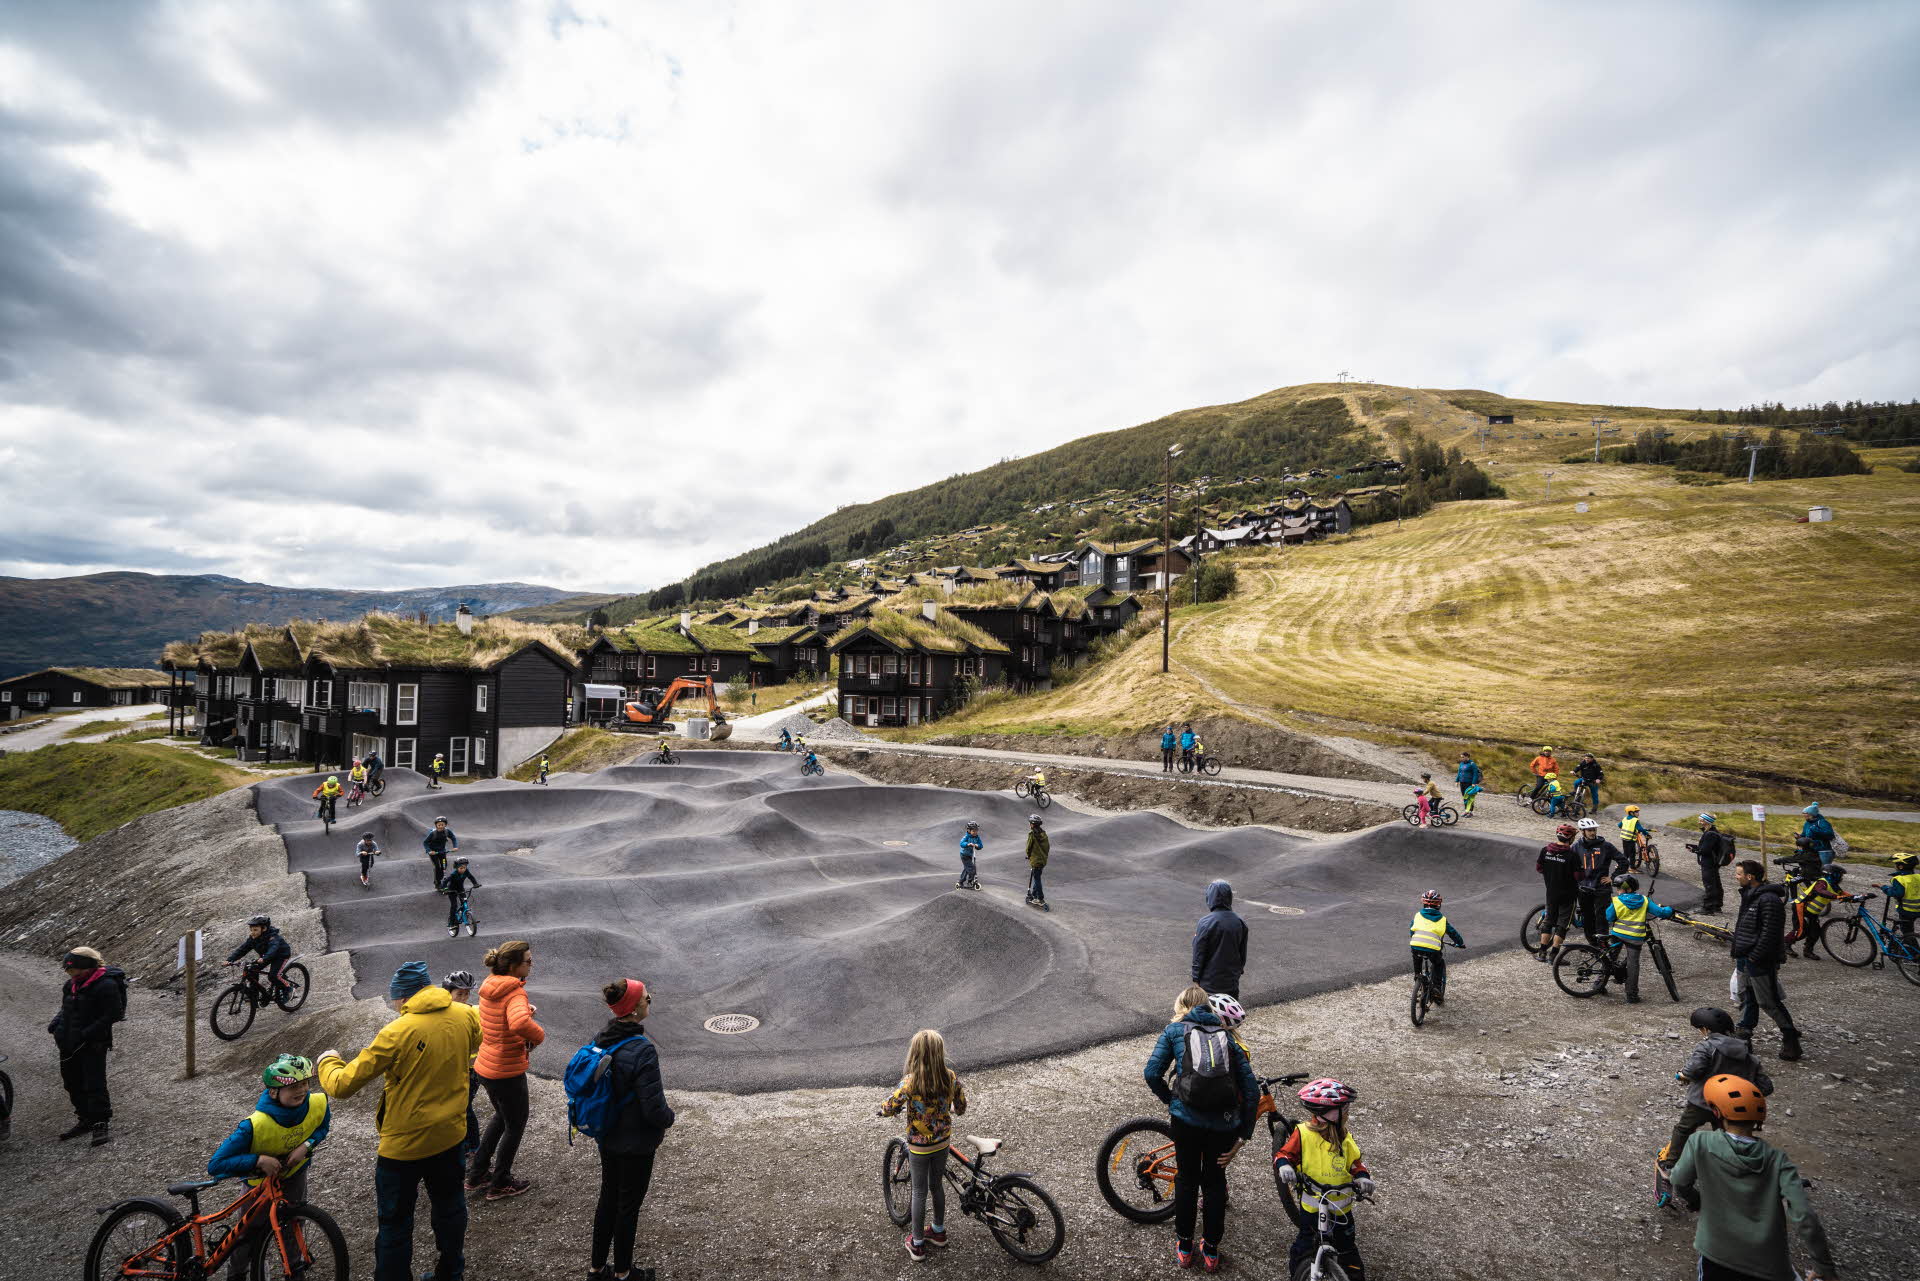 Children and adults standing round and cycling on a pumptrack in Myrkdalen Fjellandsby